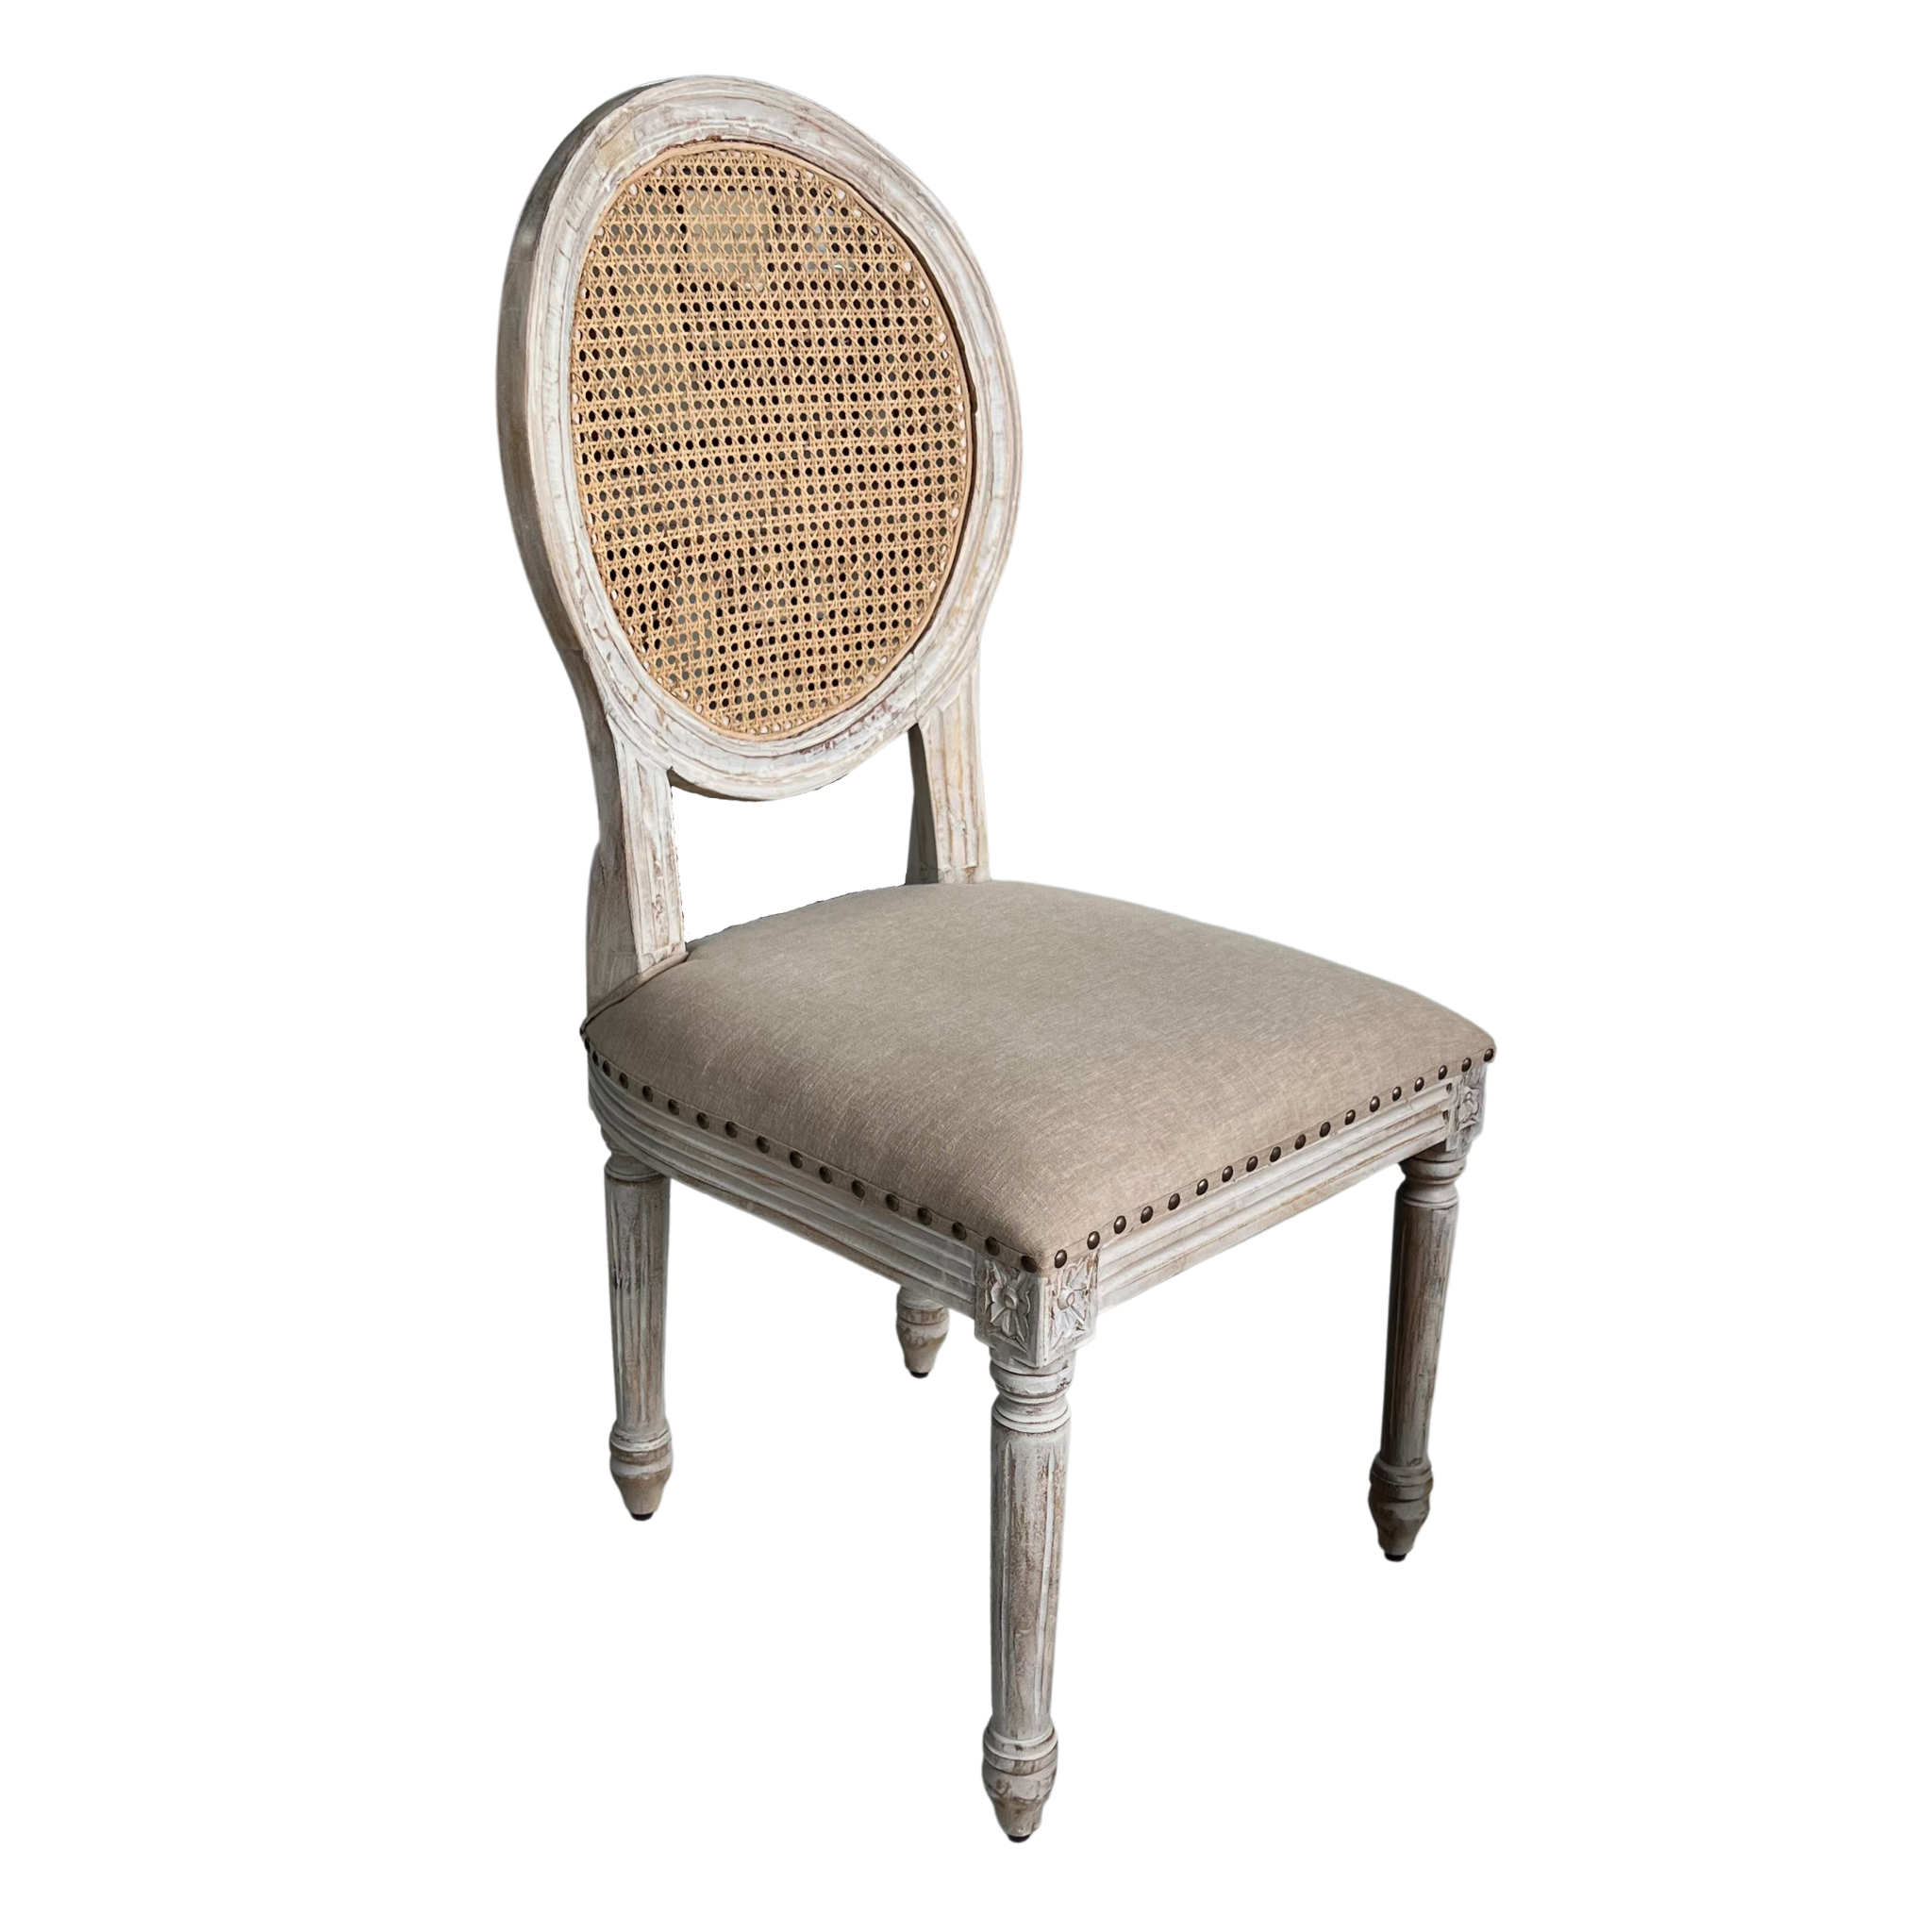 White Distressed Round Cane Chair